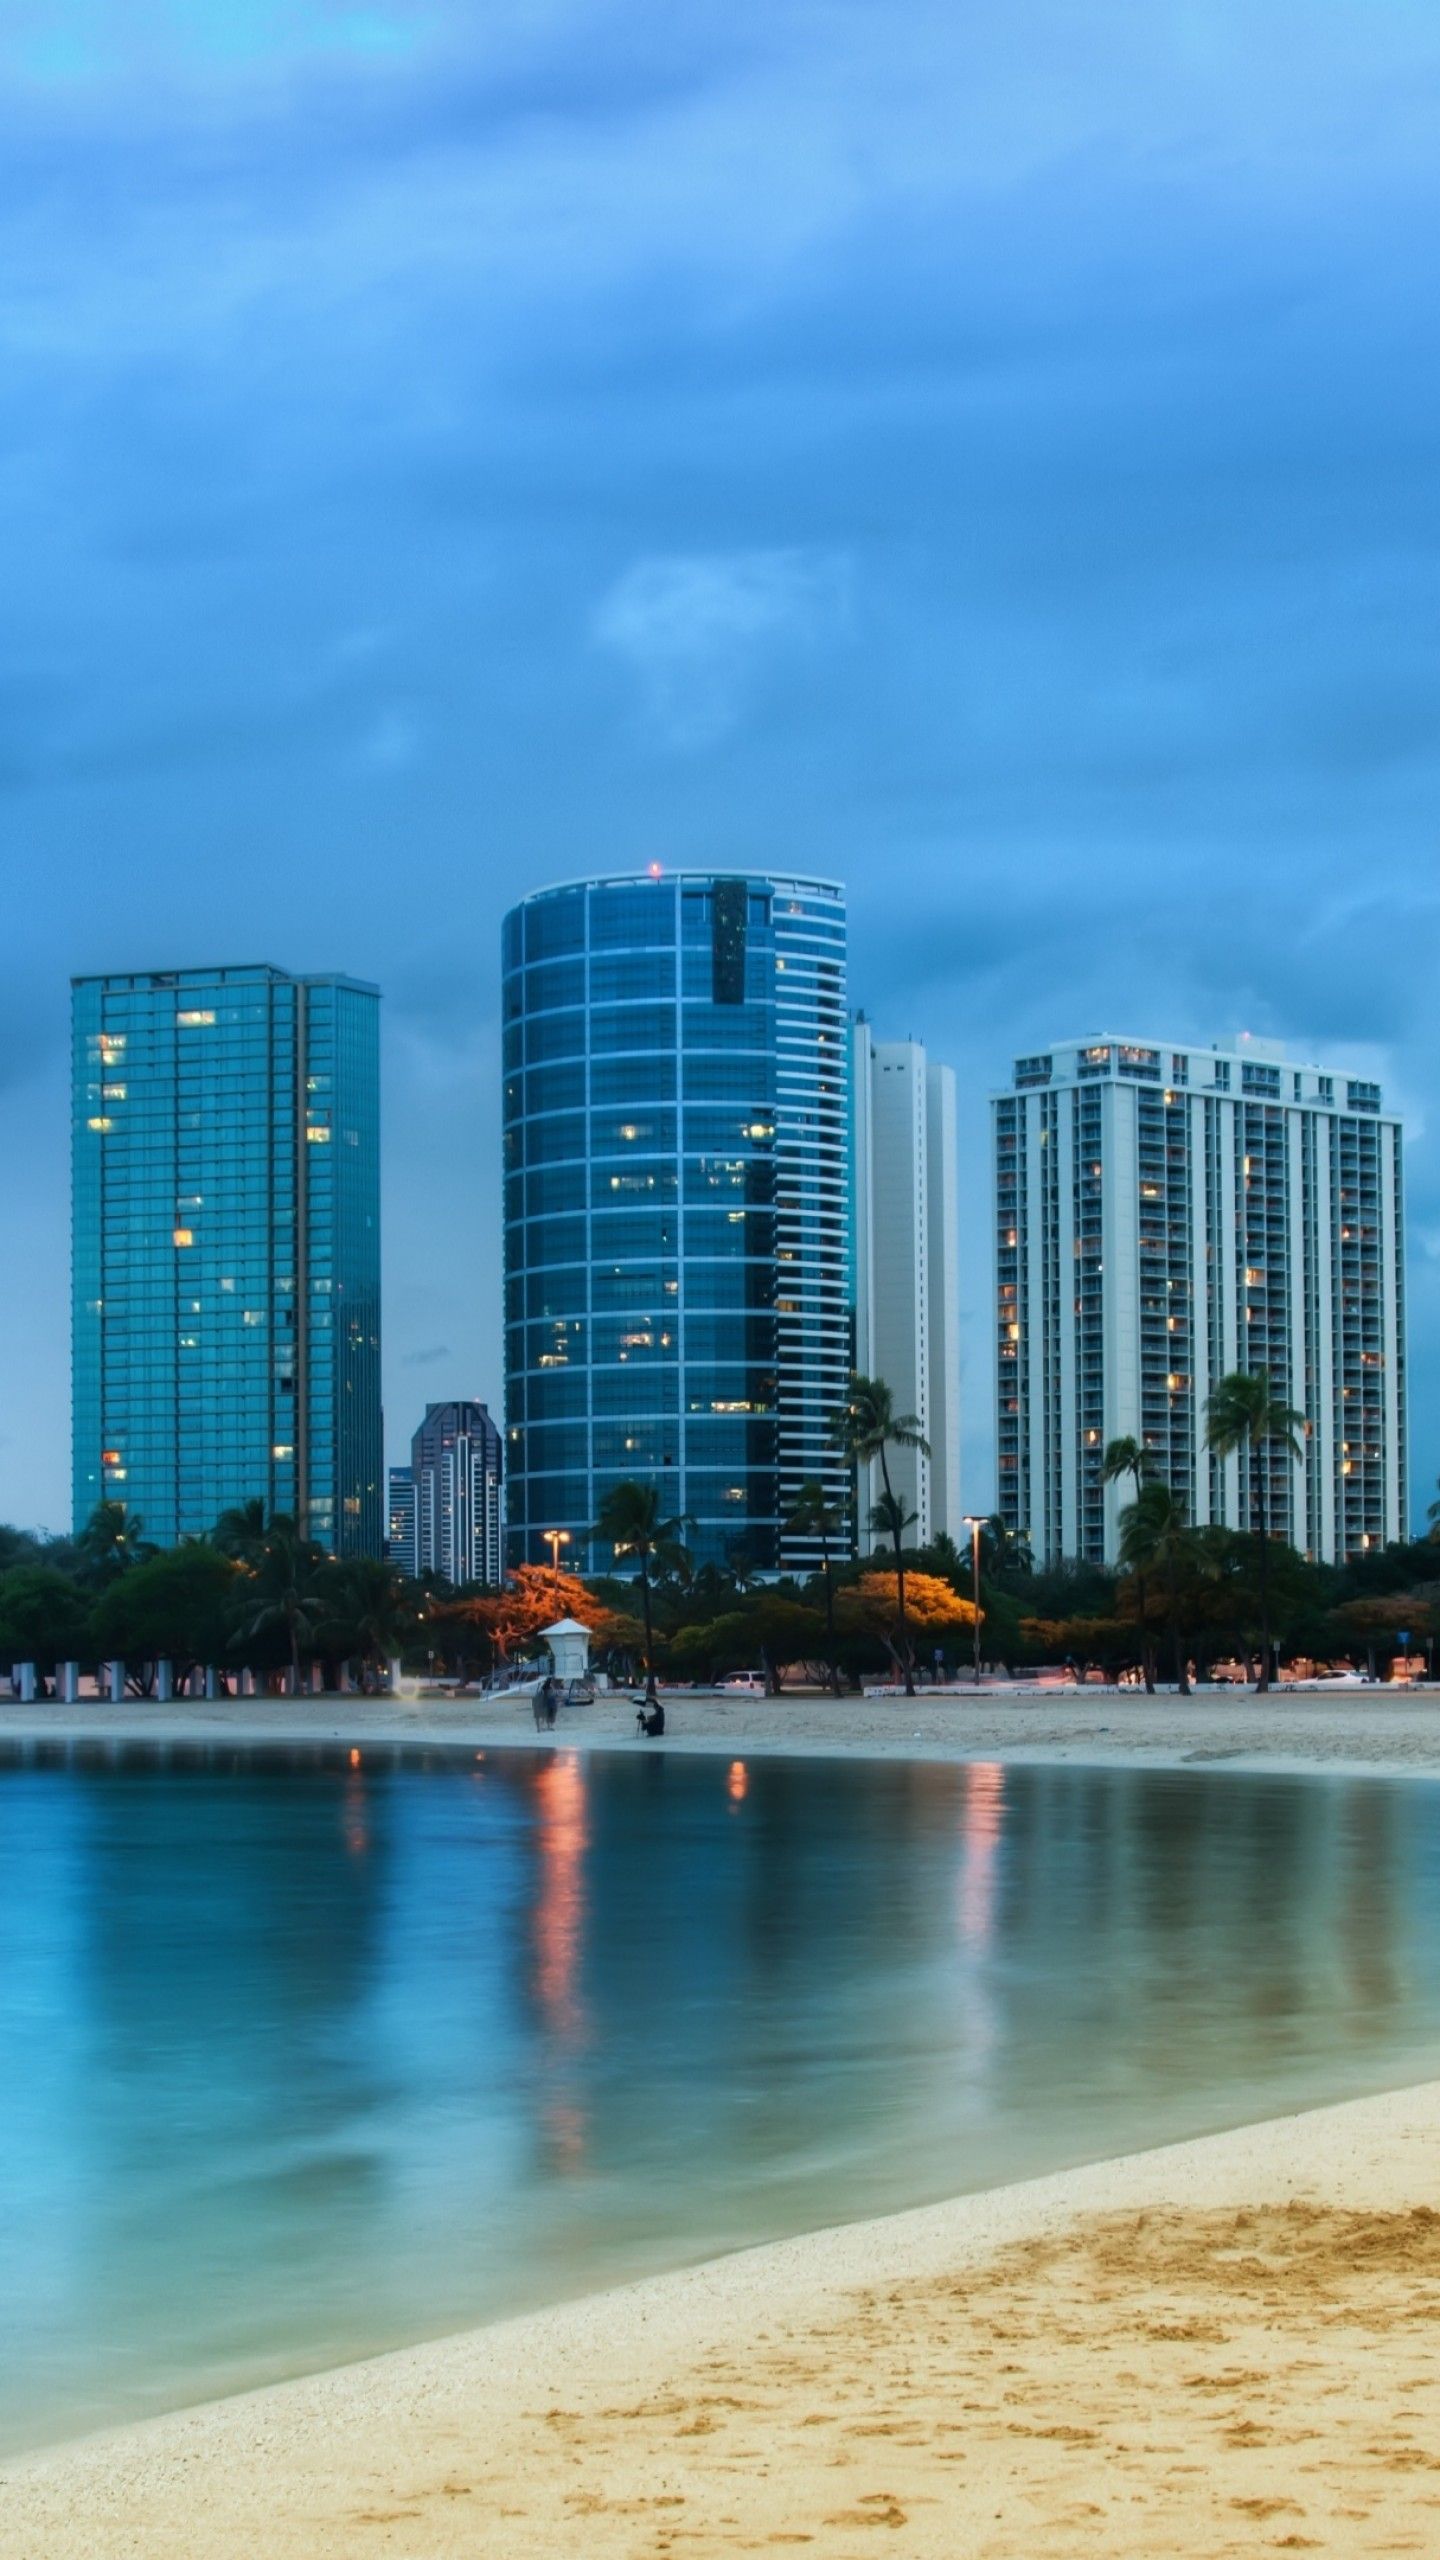 A beach with buildings in the background - Beach, Miami